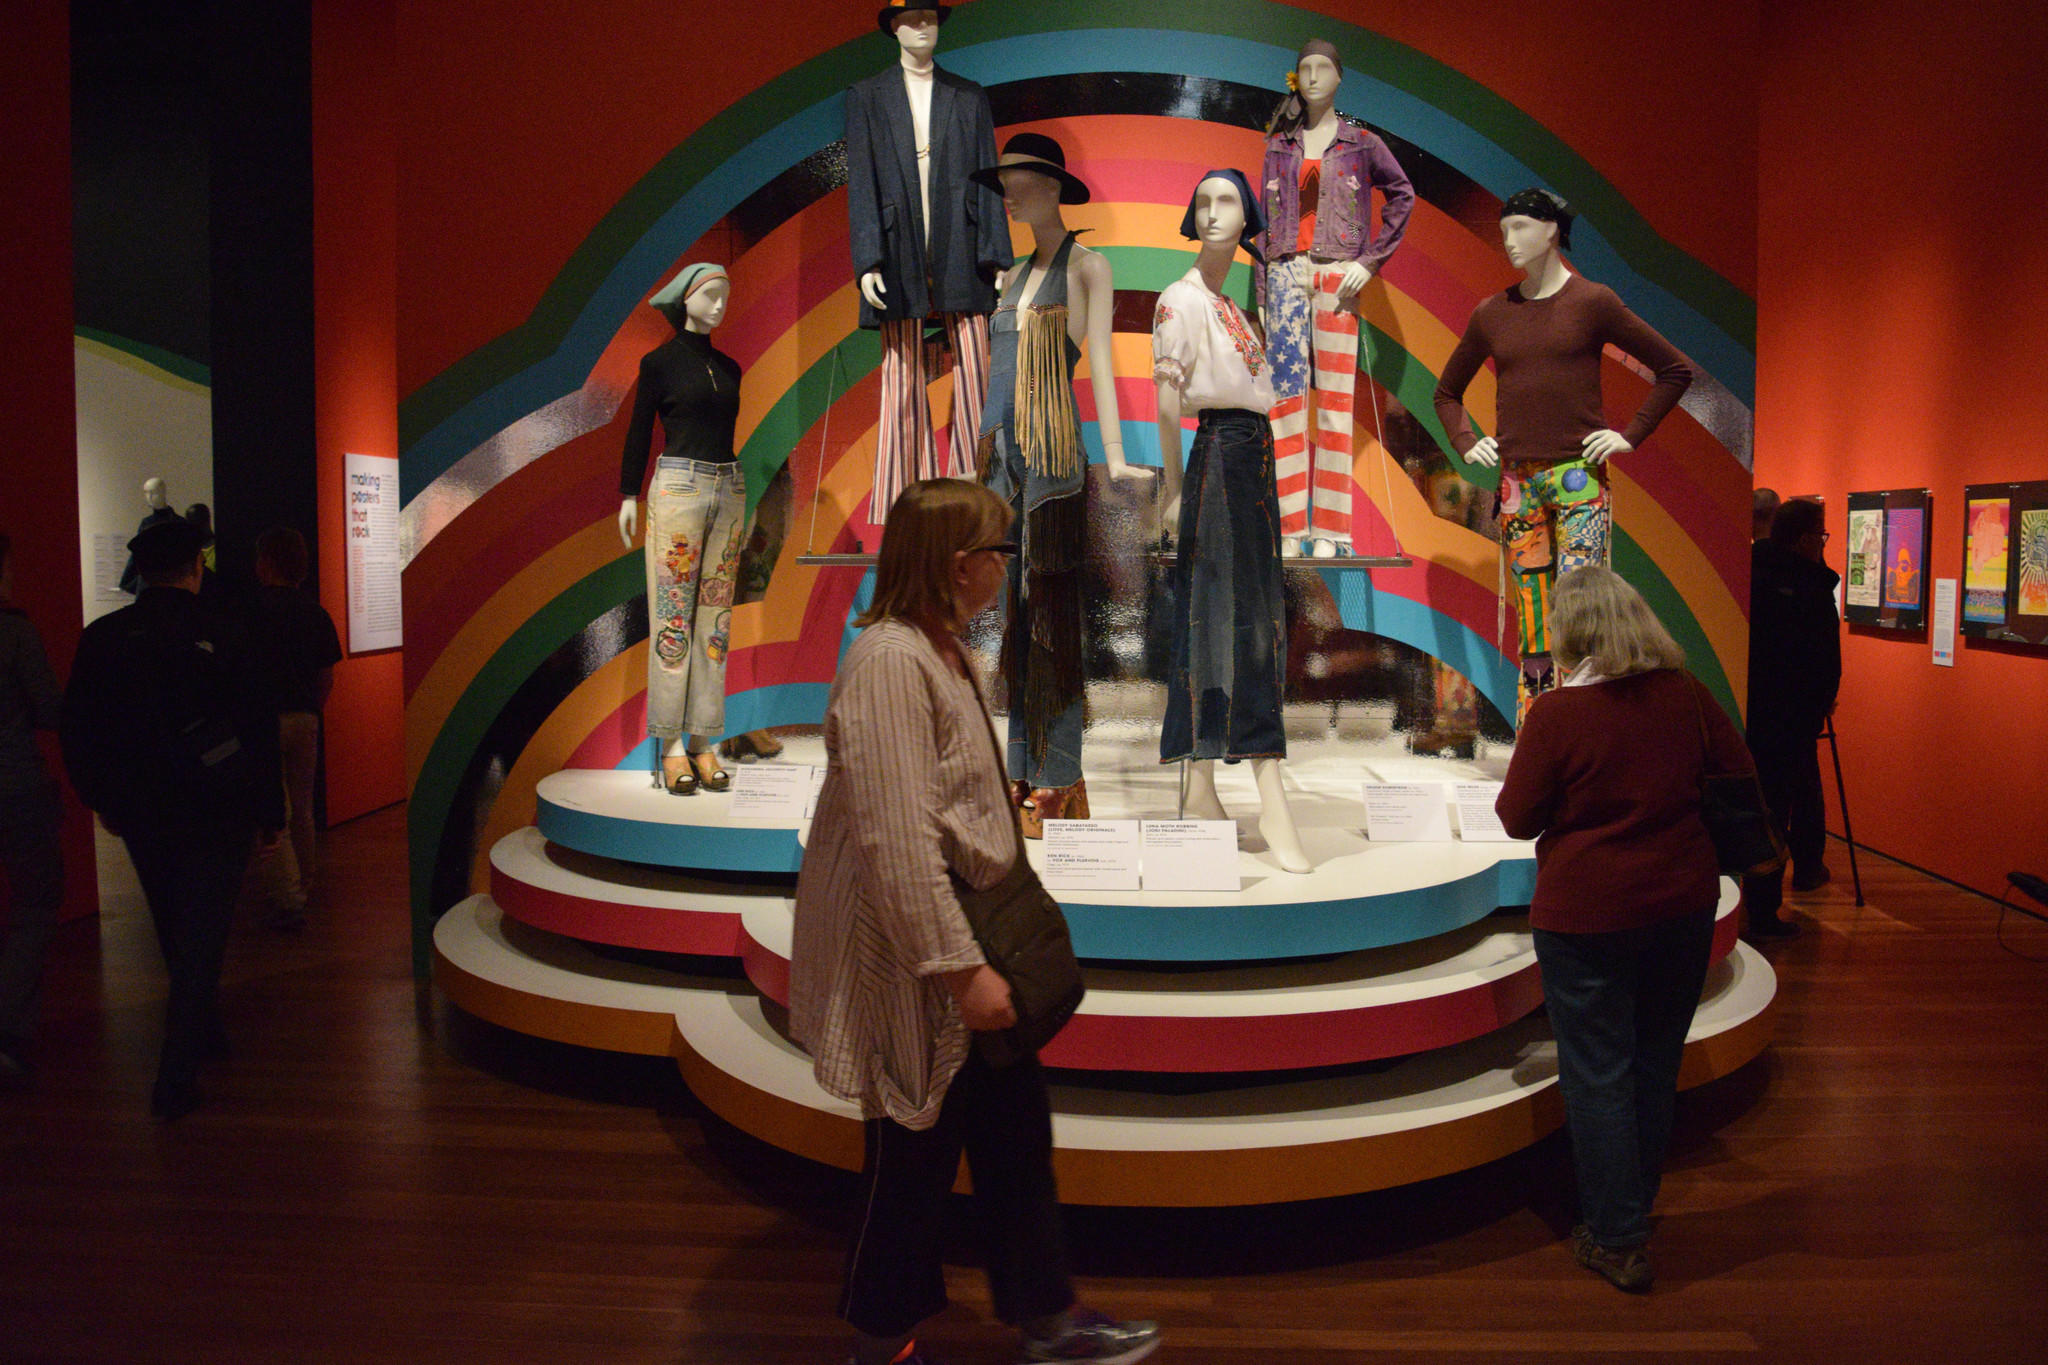 The De Young Museum in San Francisco has an exhibition dedicated to the 50th anniversary of San Francisco's Summer of Love. The fashion of the '60s is woven throughout the exhibit.